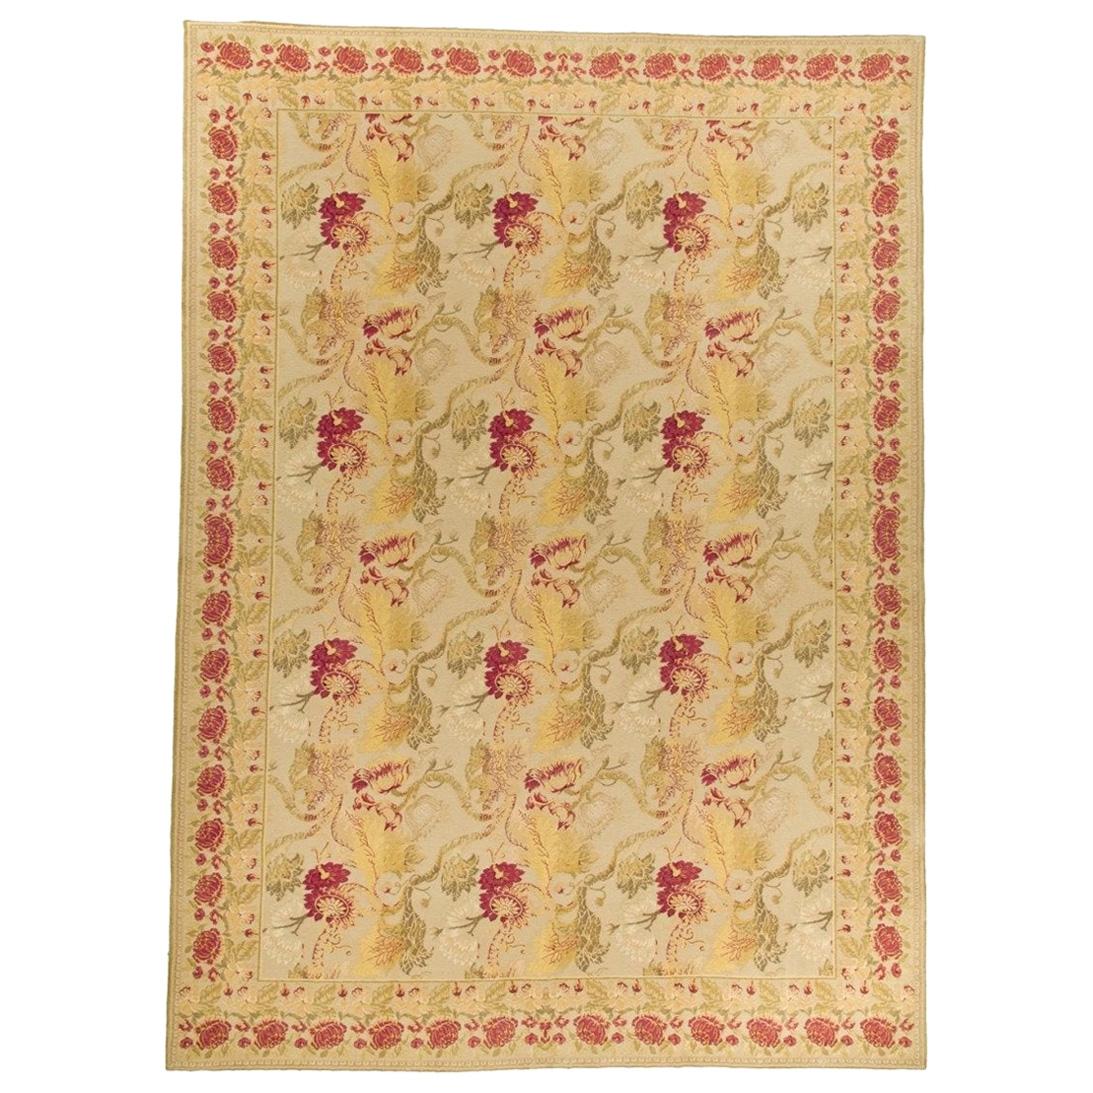 Handwoven Wool Area Rug 8'5 x 10'4 For Sale